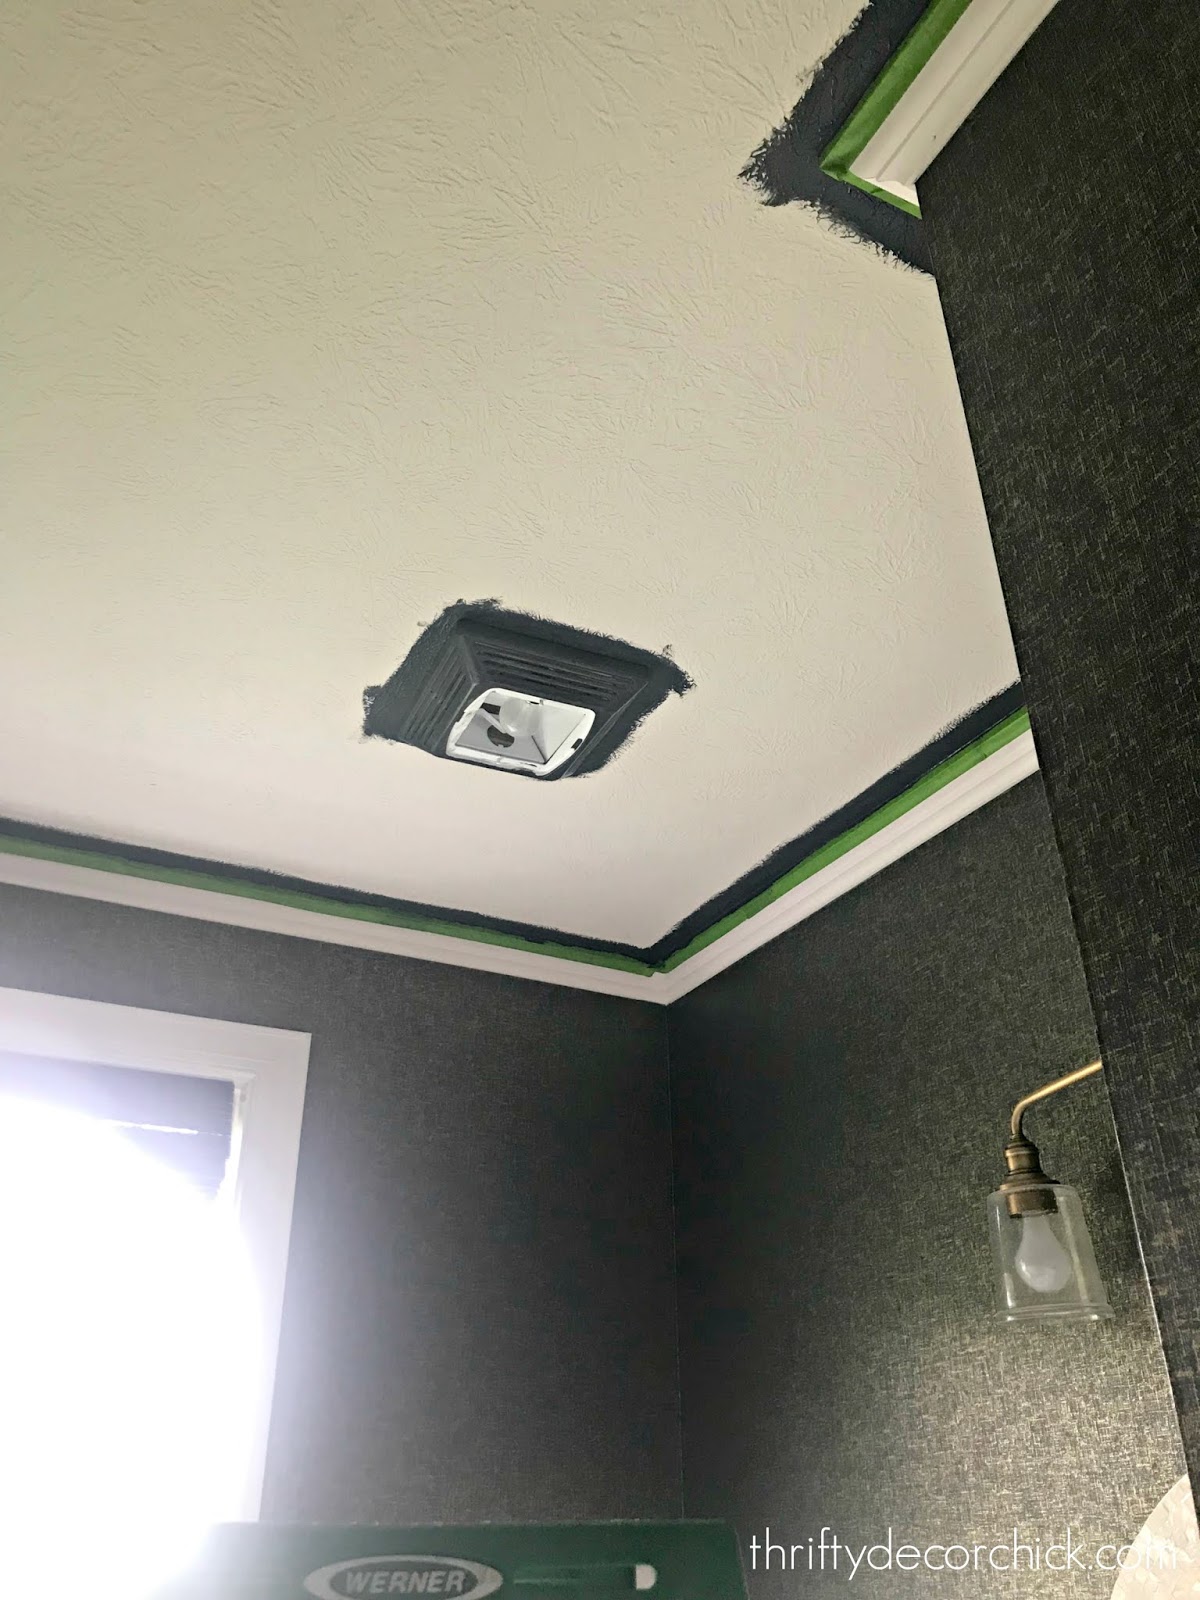 Painting a bathroom ceiling and fan